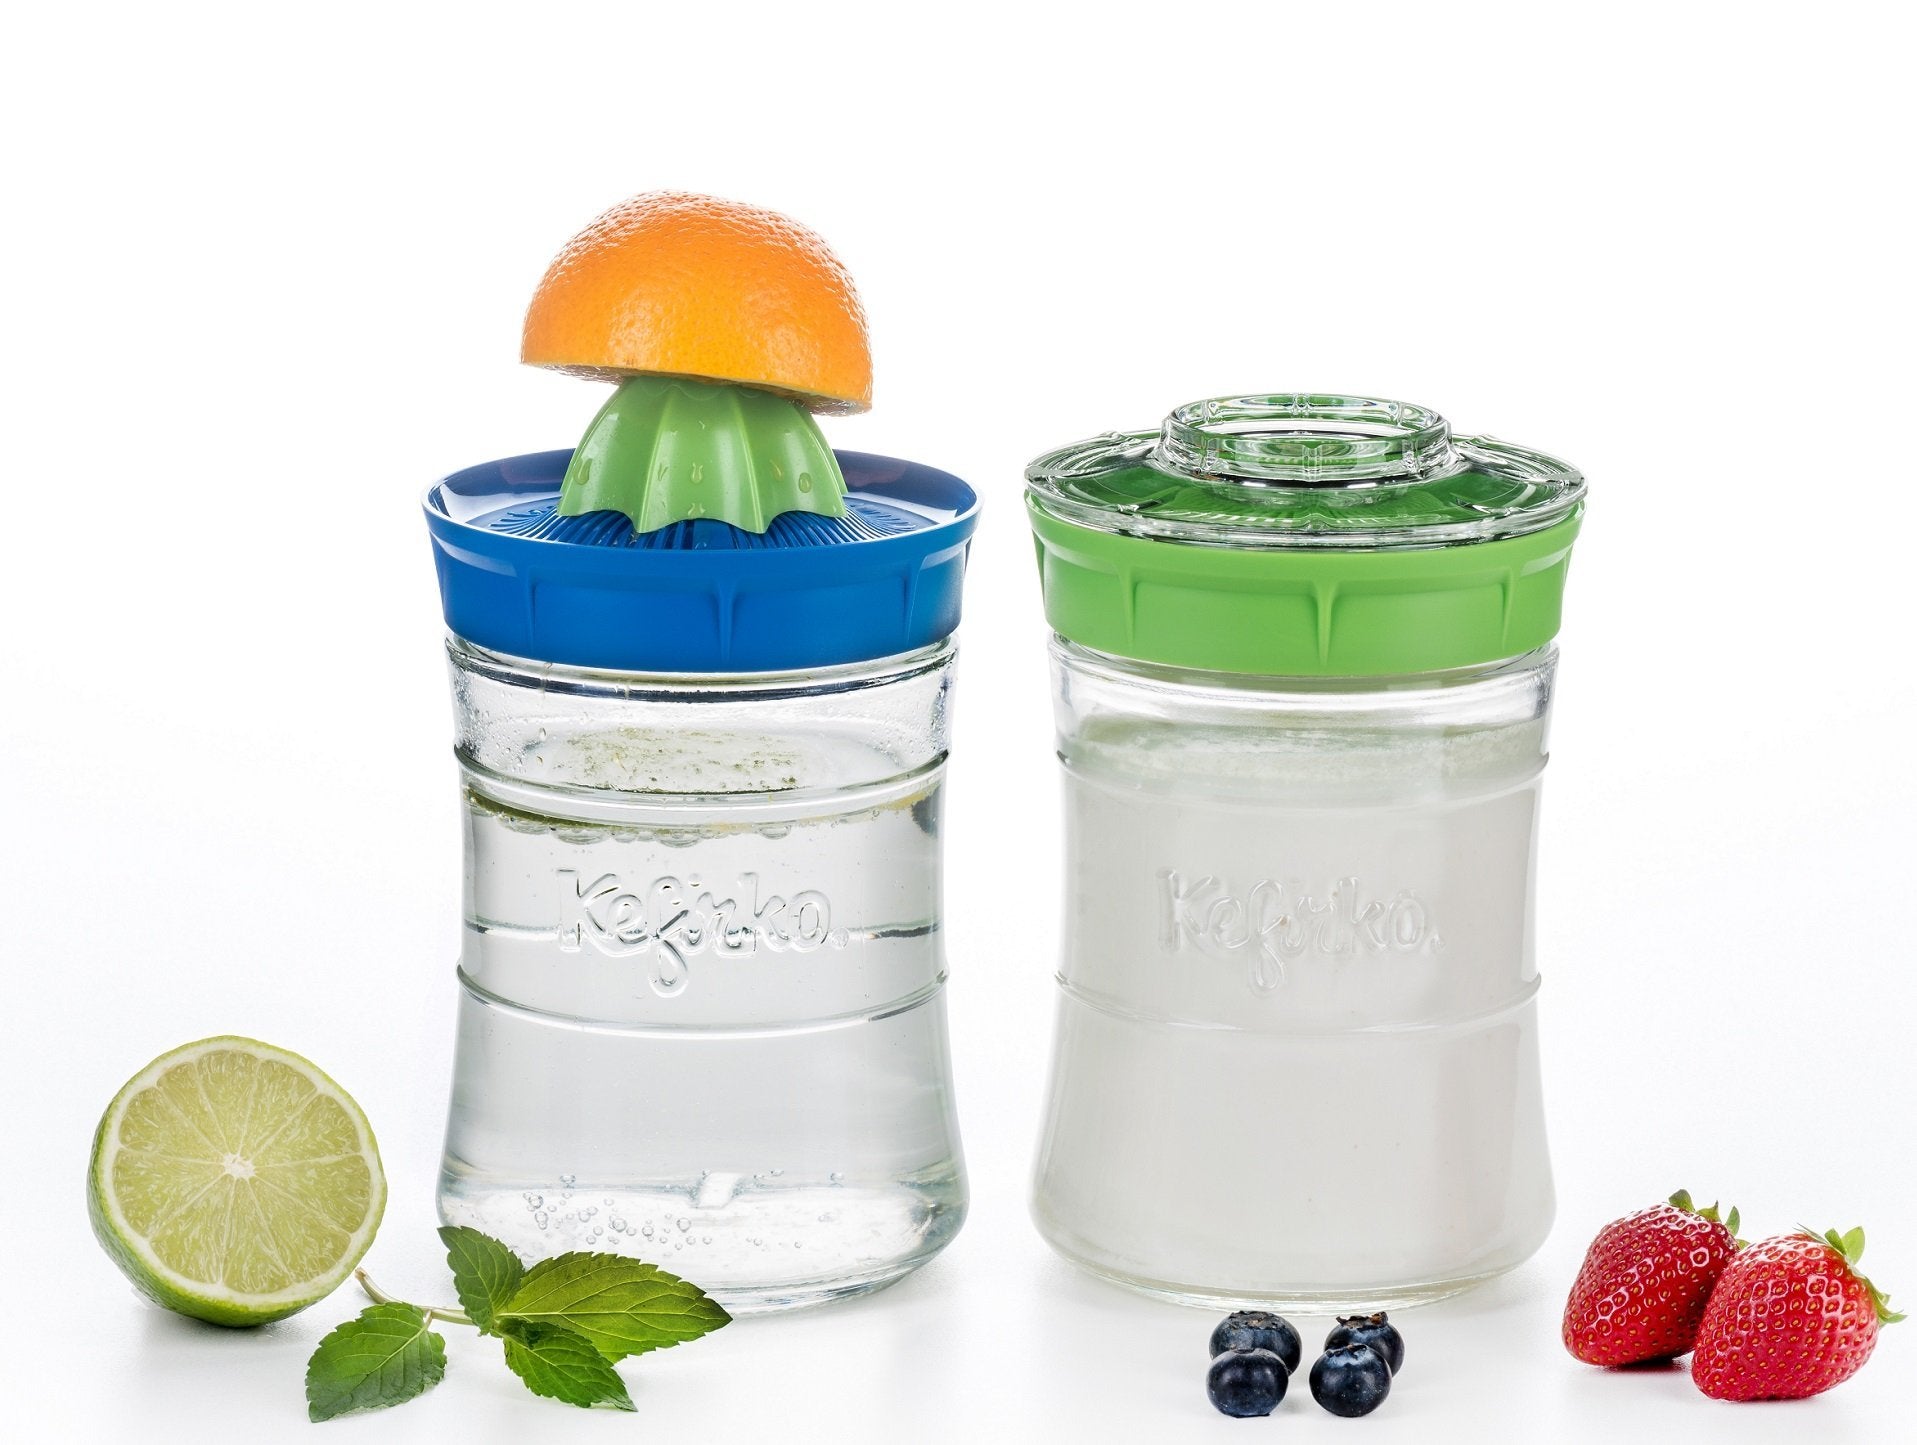 Kefirko Fermenter Kit Easily Brew Your Own Milk or Water Kefir at Home, or  Grow Sprouted Seeds 